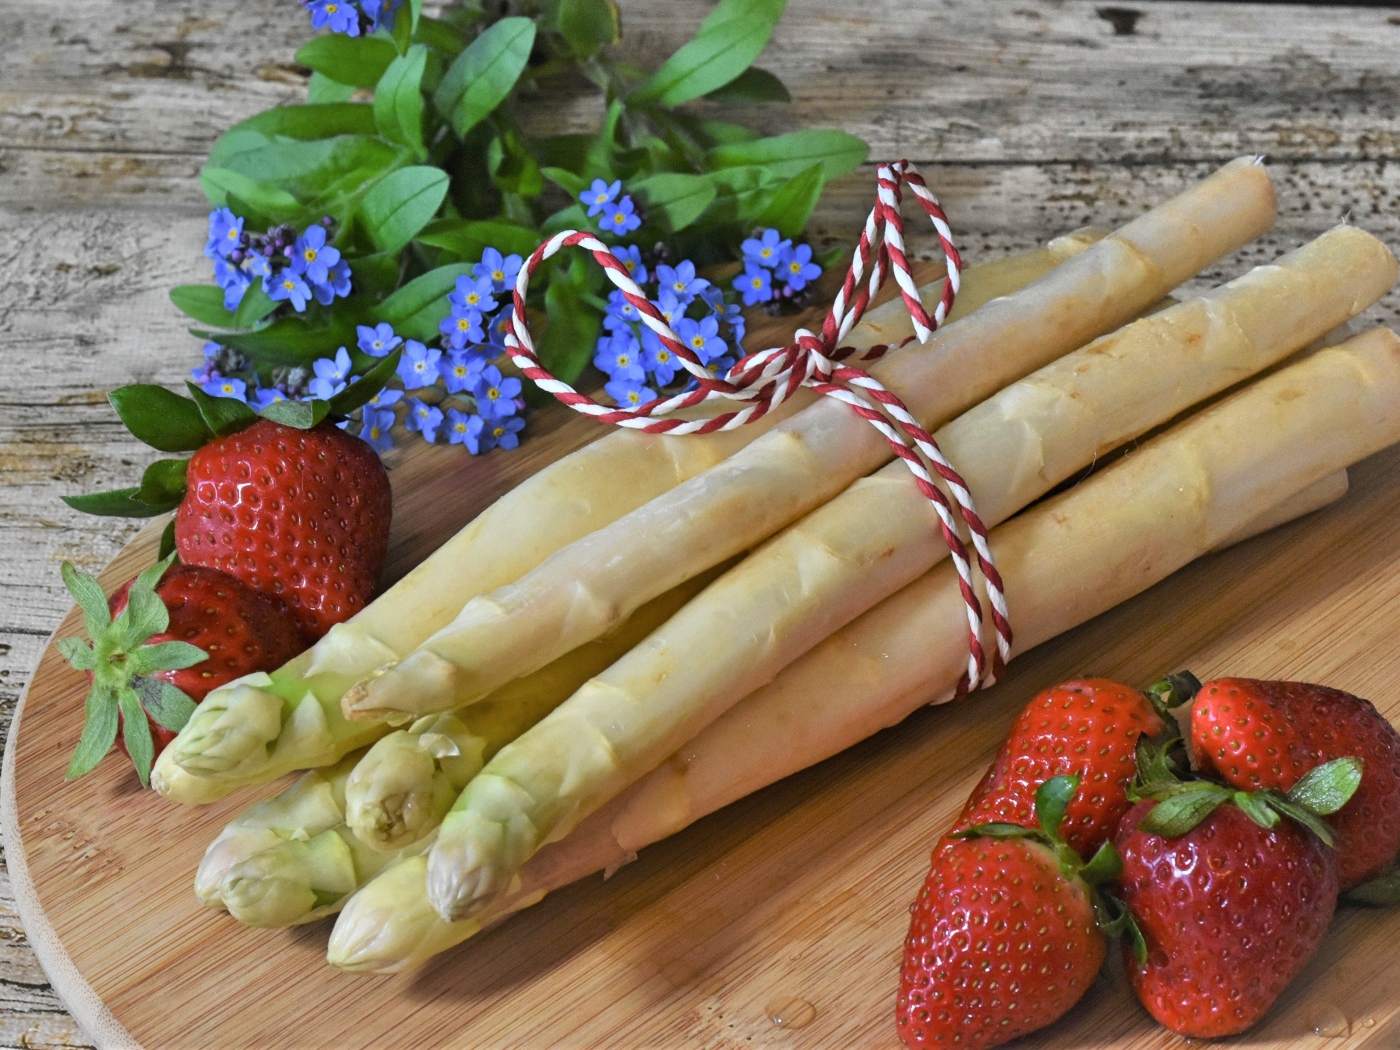 Fresh asparagus on the table with strawberries and forget-me-not flowers